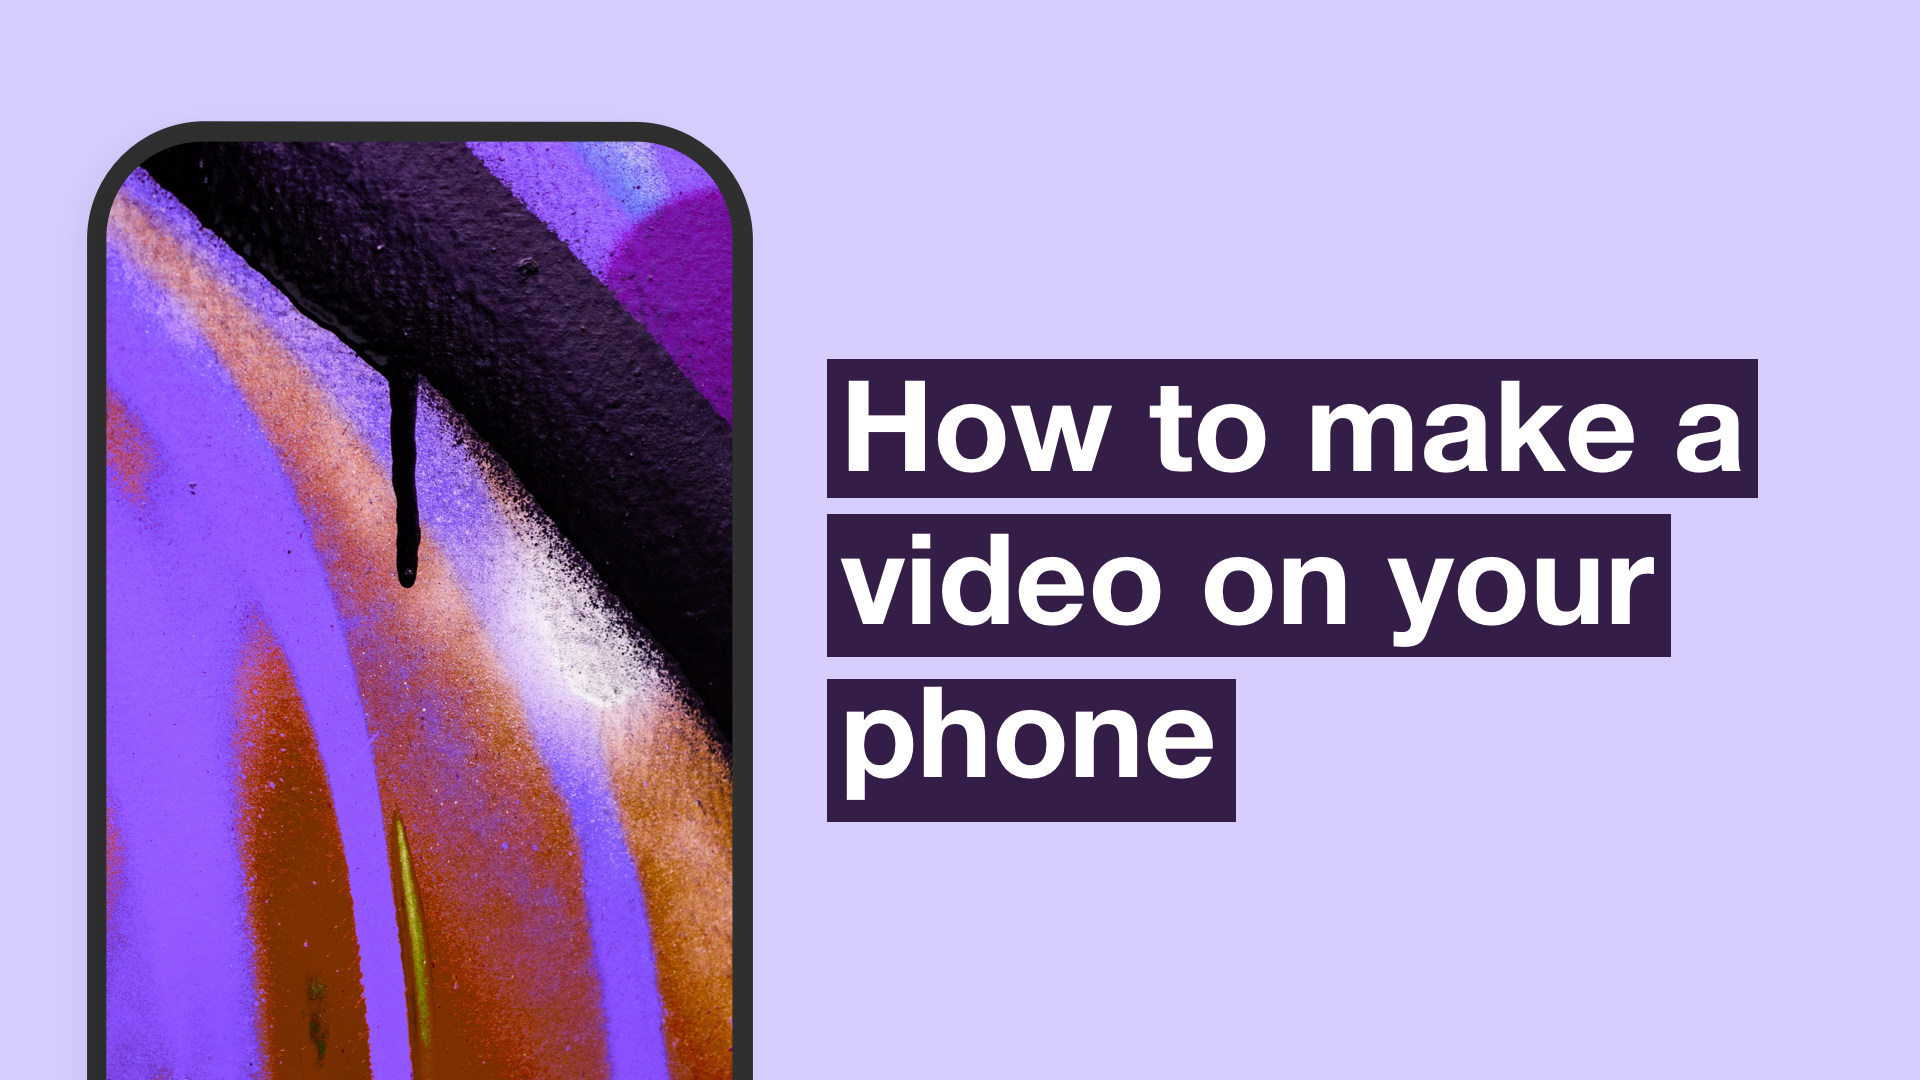 How to make a video on your phone